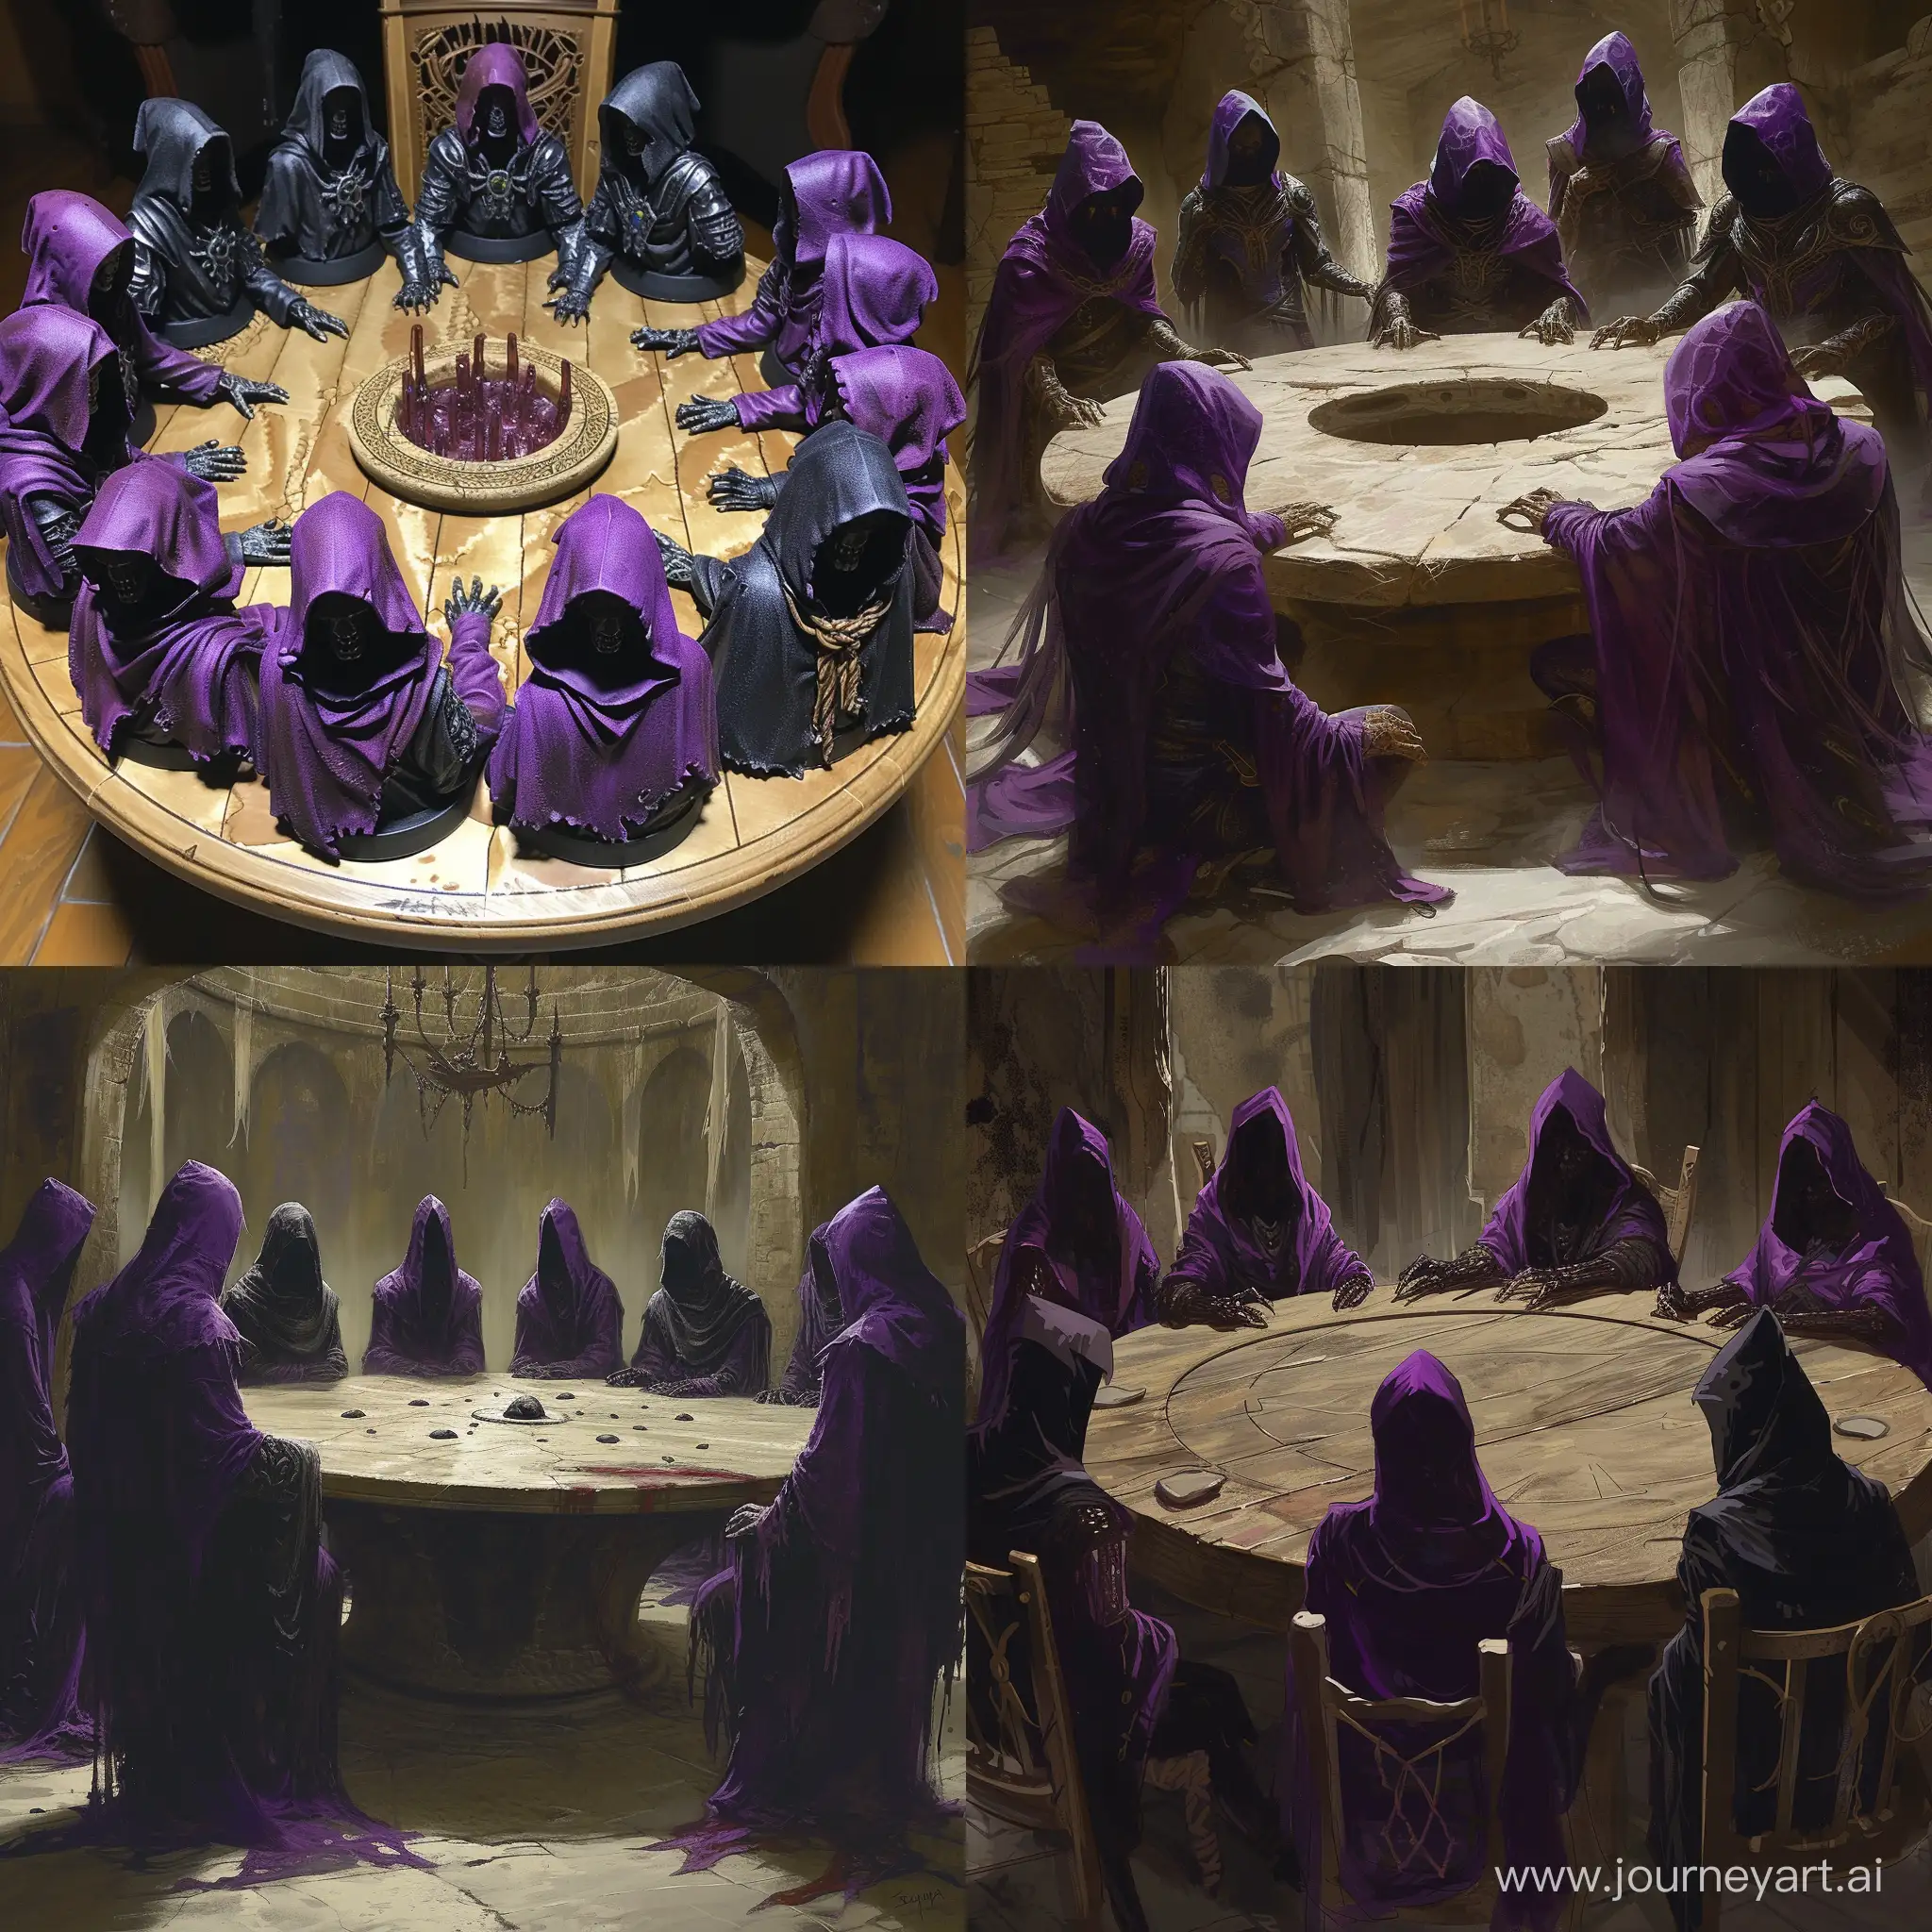 Mystical-Gathering-of-Necromancers-in-Purple-and-Black-Hoods